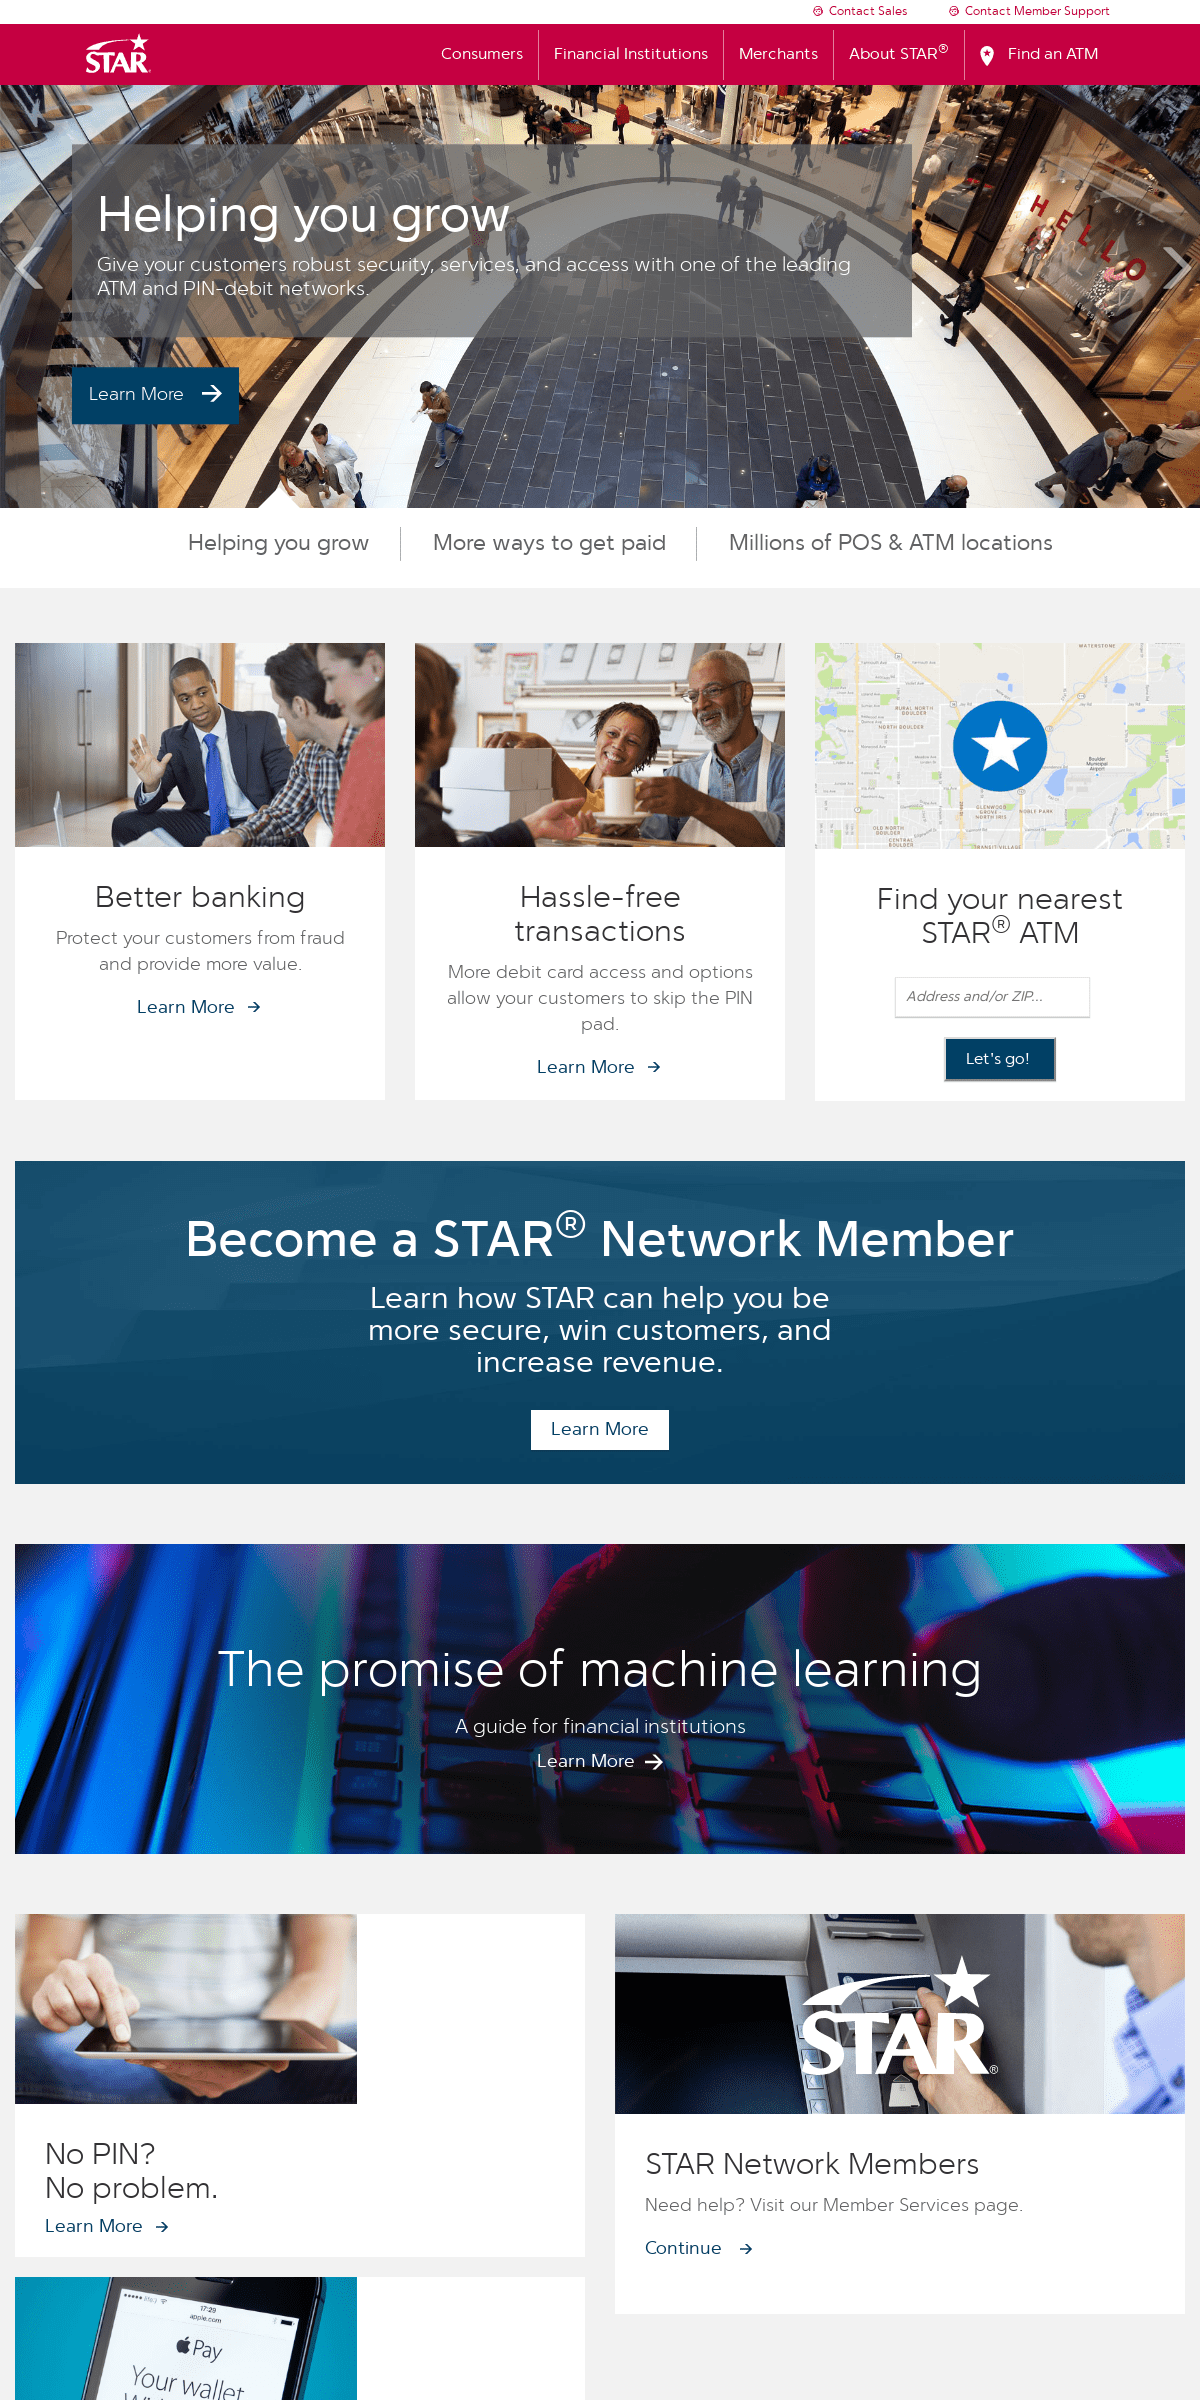 A complete backup of star.com